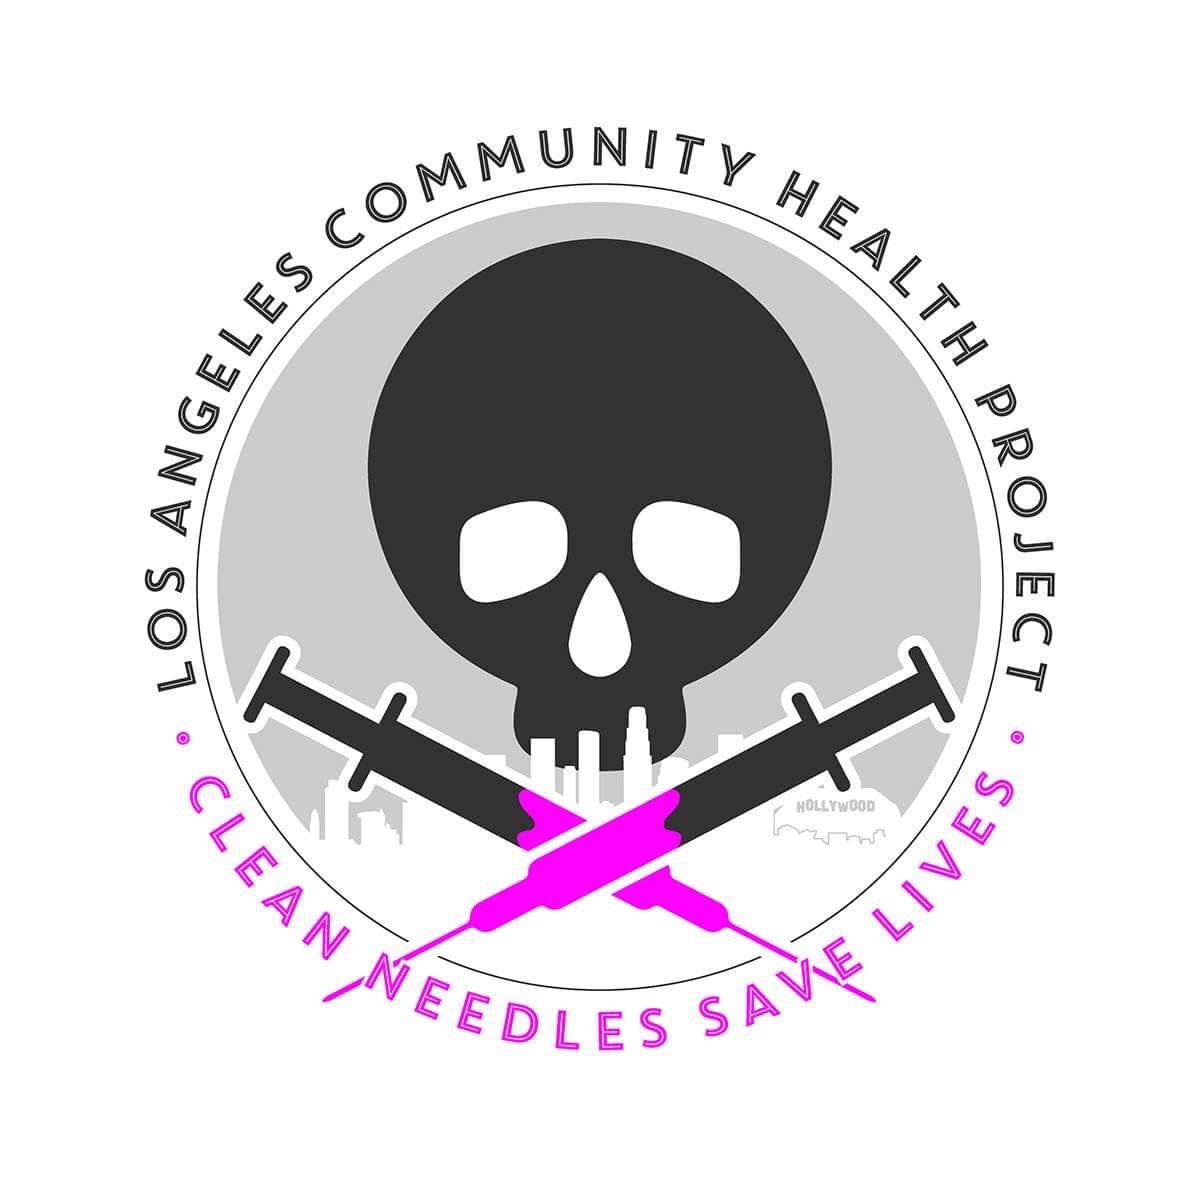 We have operated a community based harm reduction program in LA since 1991. Syringe access, healthcare and MAT navigation, education, and advocacy.